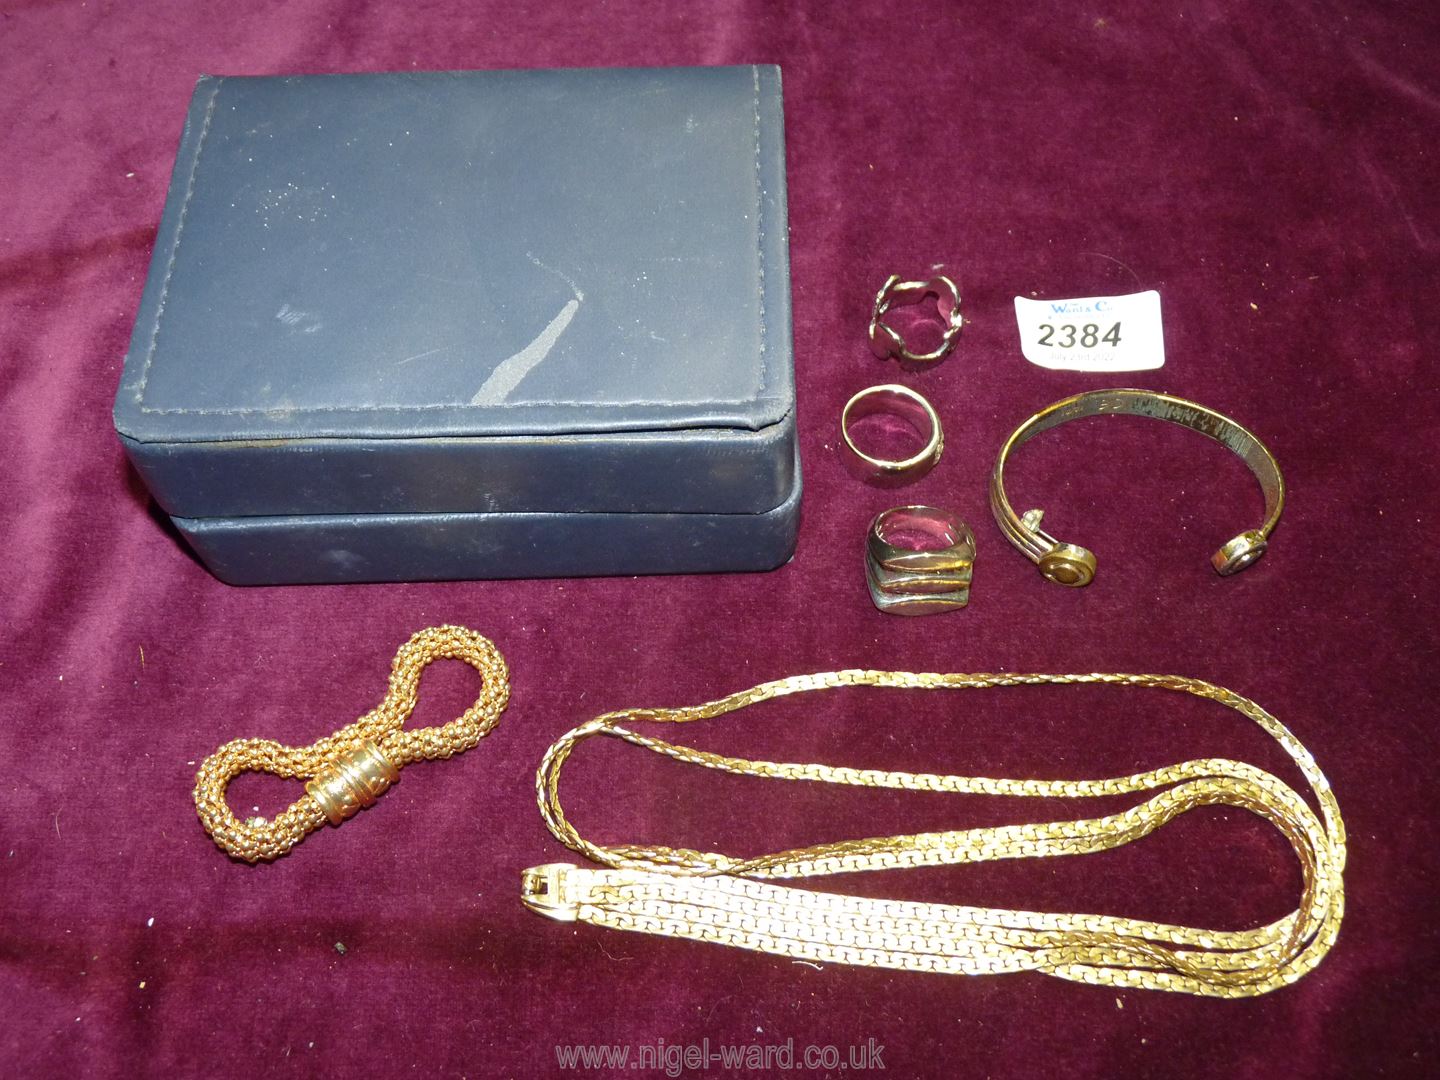 Miscellaneous jewellery including 3 white metal dress rings, bracelets and two strand necklace.